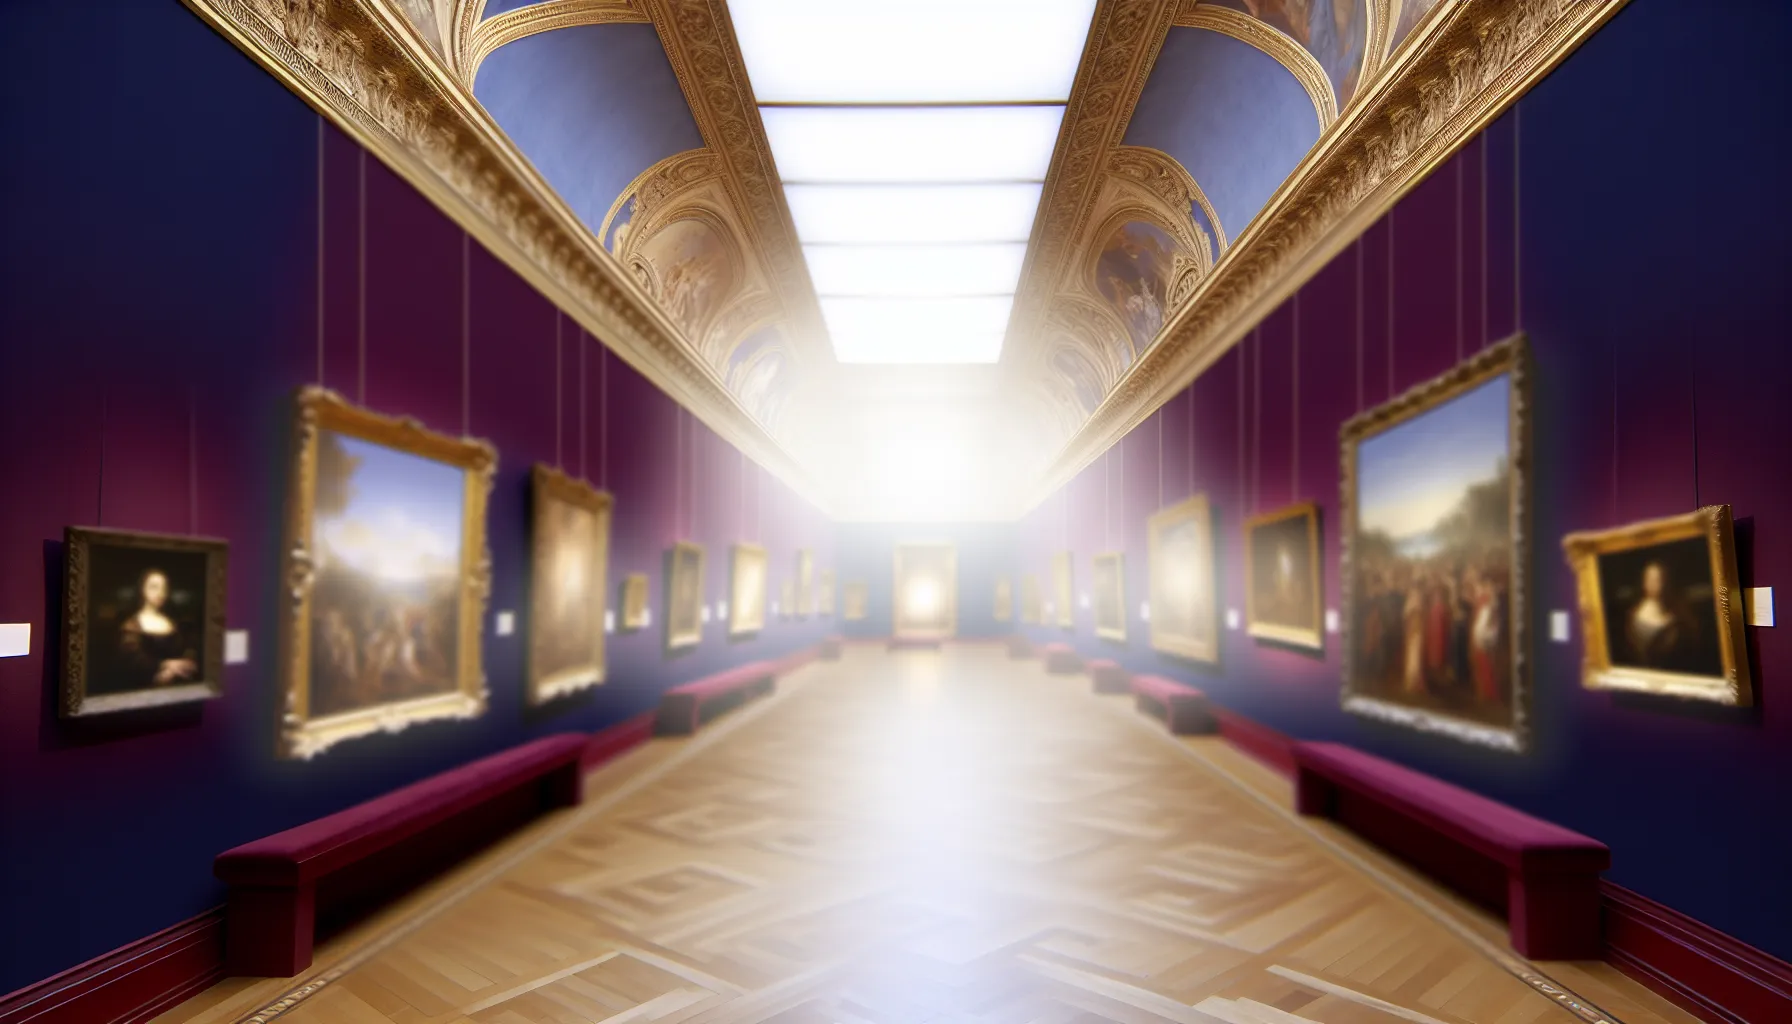 <strong>Embark on a Voyage through Time</strong>: As you traverse the galleries of history from the comfort of your own nook, each artwork is a gateway to another era, another soul, another shared whisper between lovers.